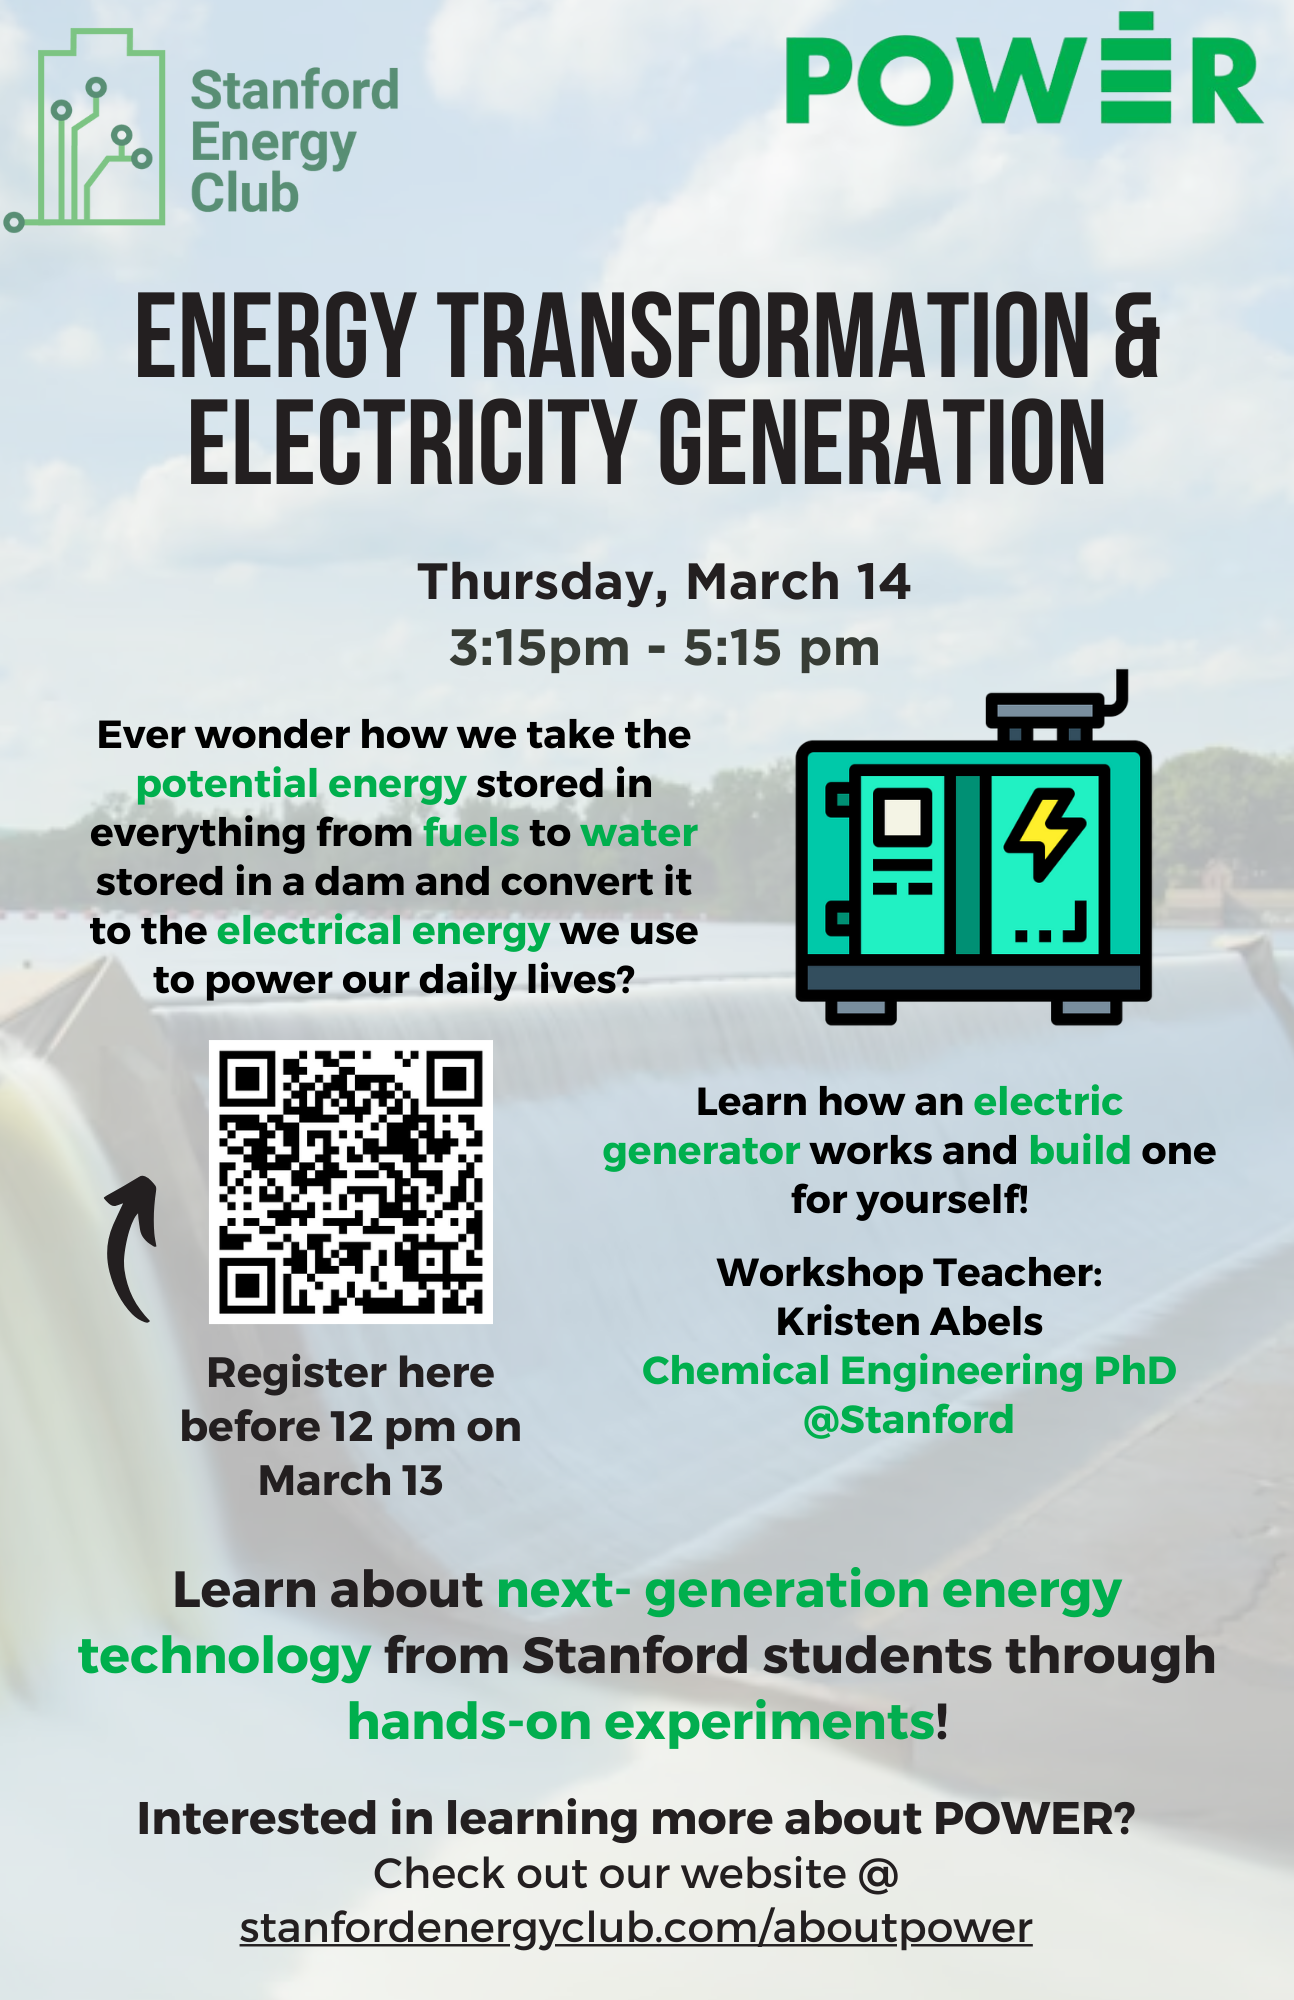 Flyer with energy and power symbols